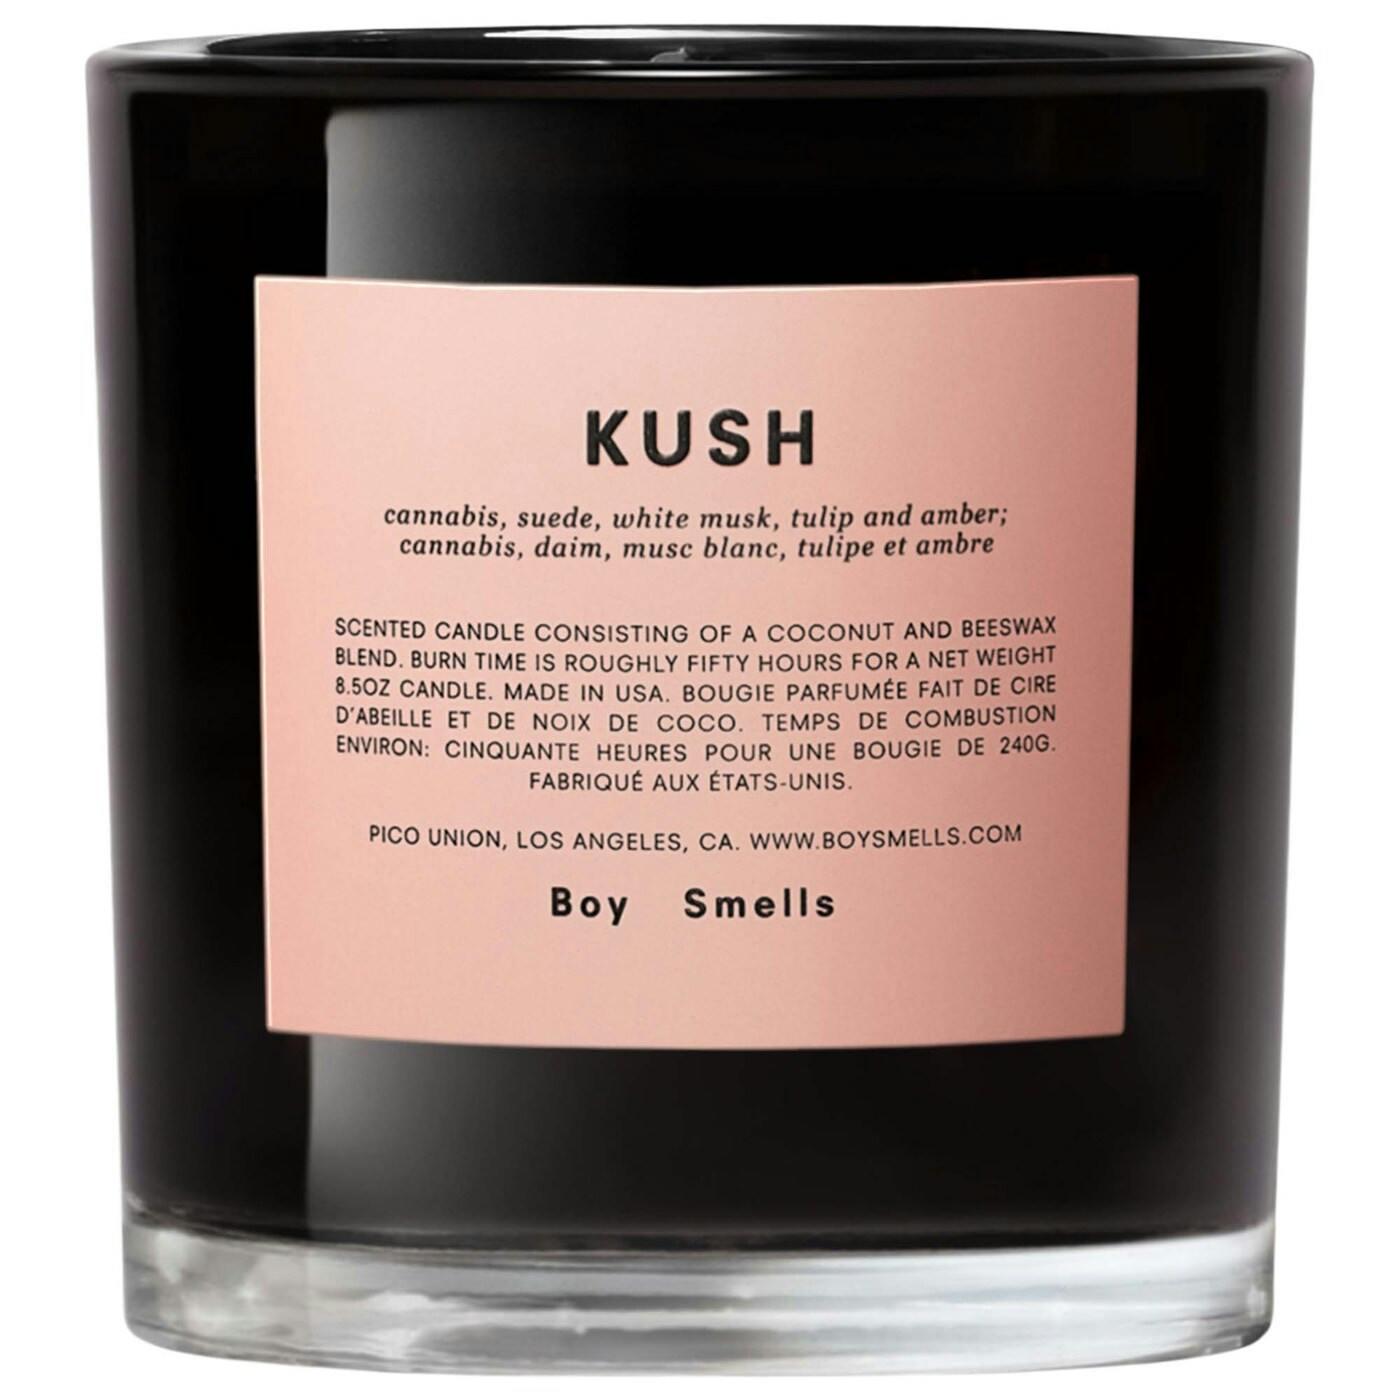 Boy Smells' Kush candle, in a black glass tumbler with a pink minimal label. 